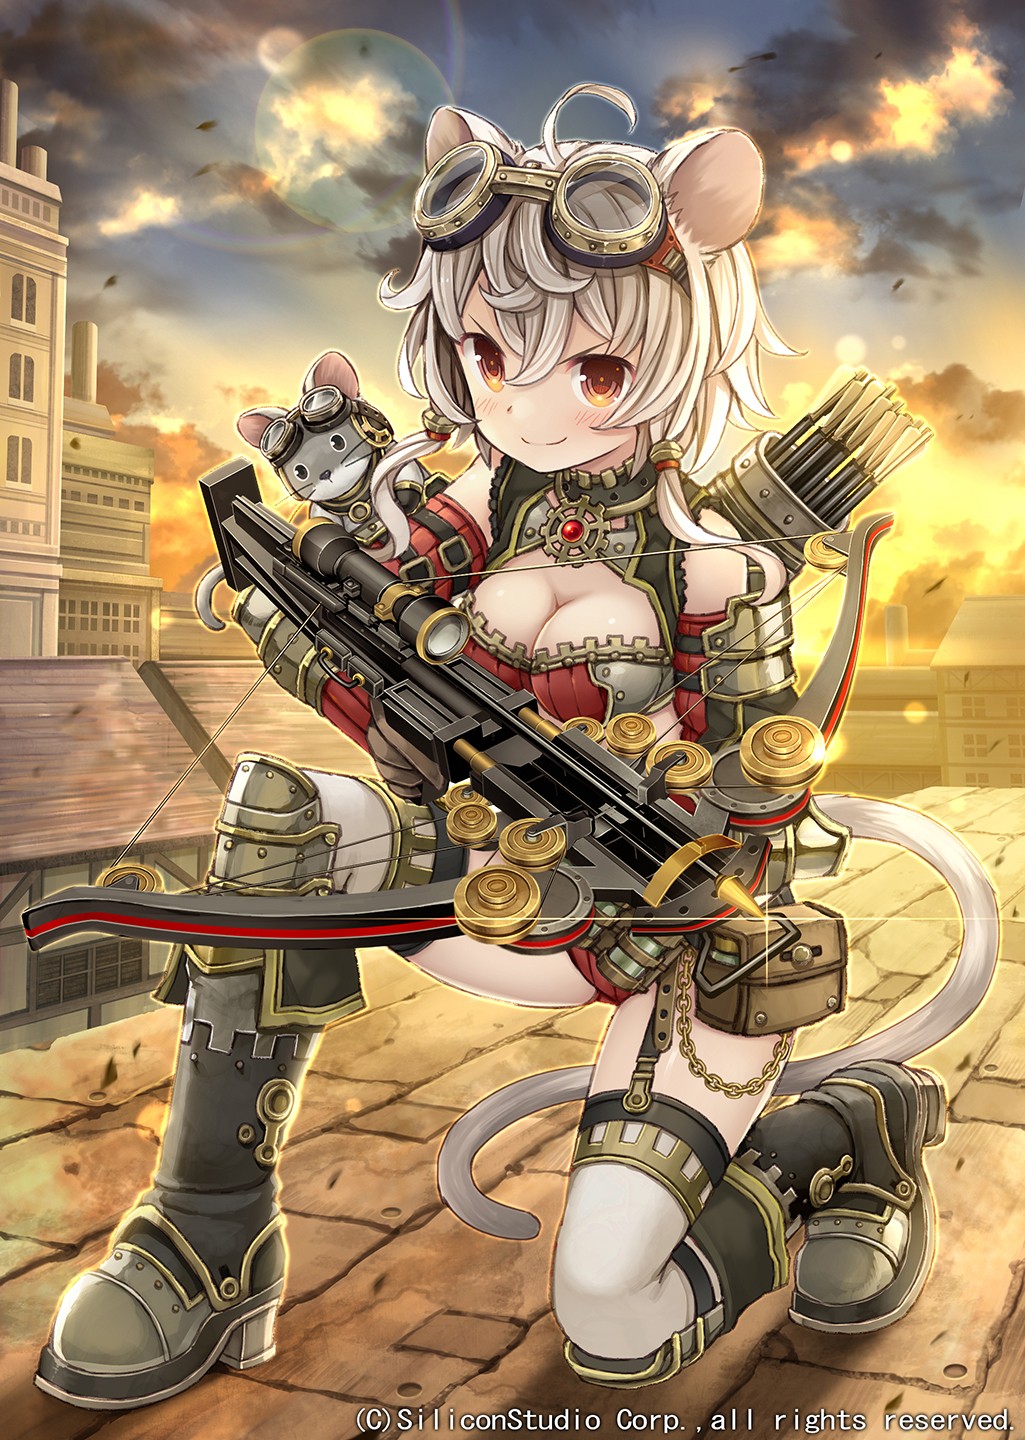 Anime 1025x1440 anime anime girls armor animal ears red eyes weapon crossbow women Pixiv boobs boots smiling goggles blonde kneeling girls with guns